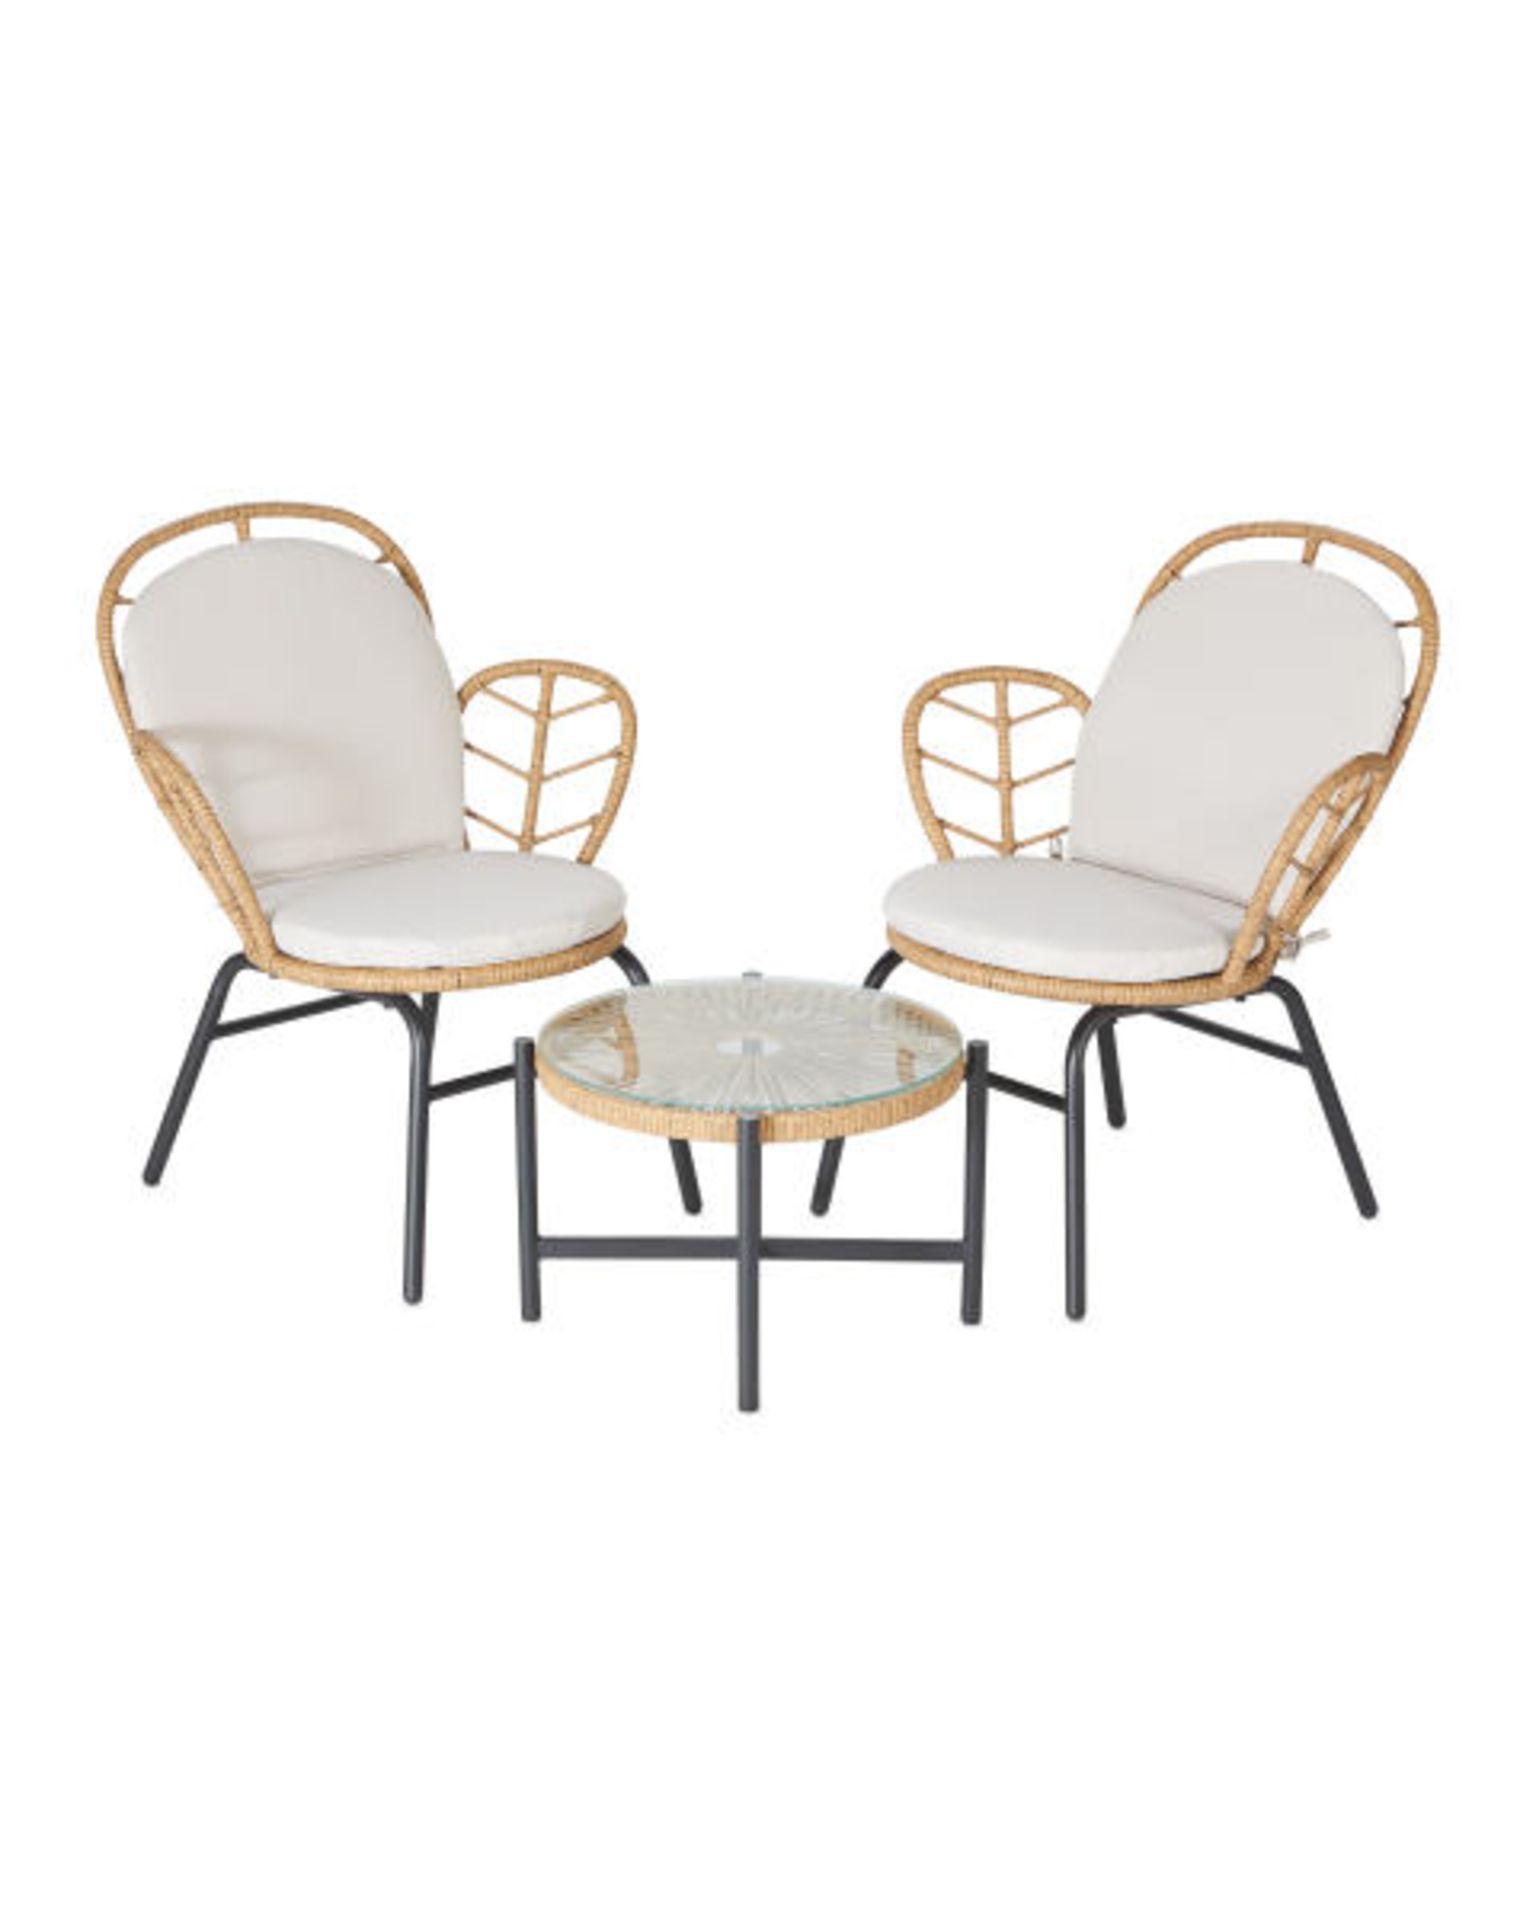 Luxury Petal Rattan Bistro Set. Transform your garden and create a space where you can relax with - Image 3 of 5